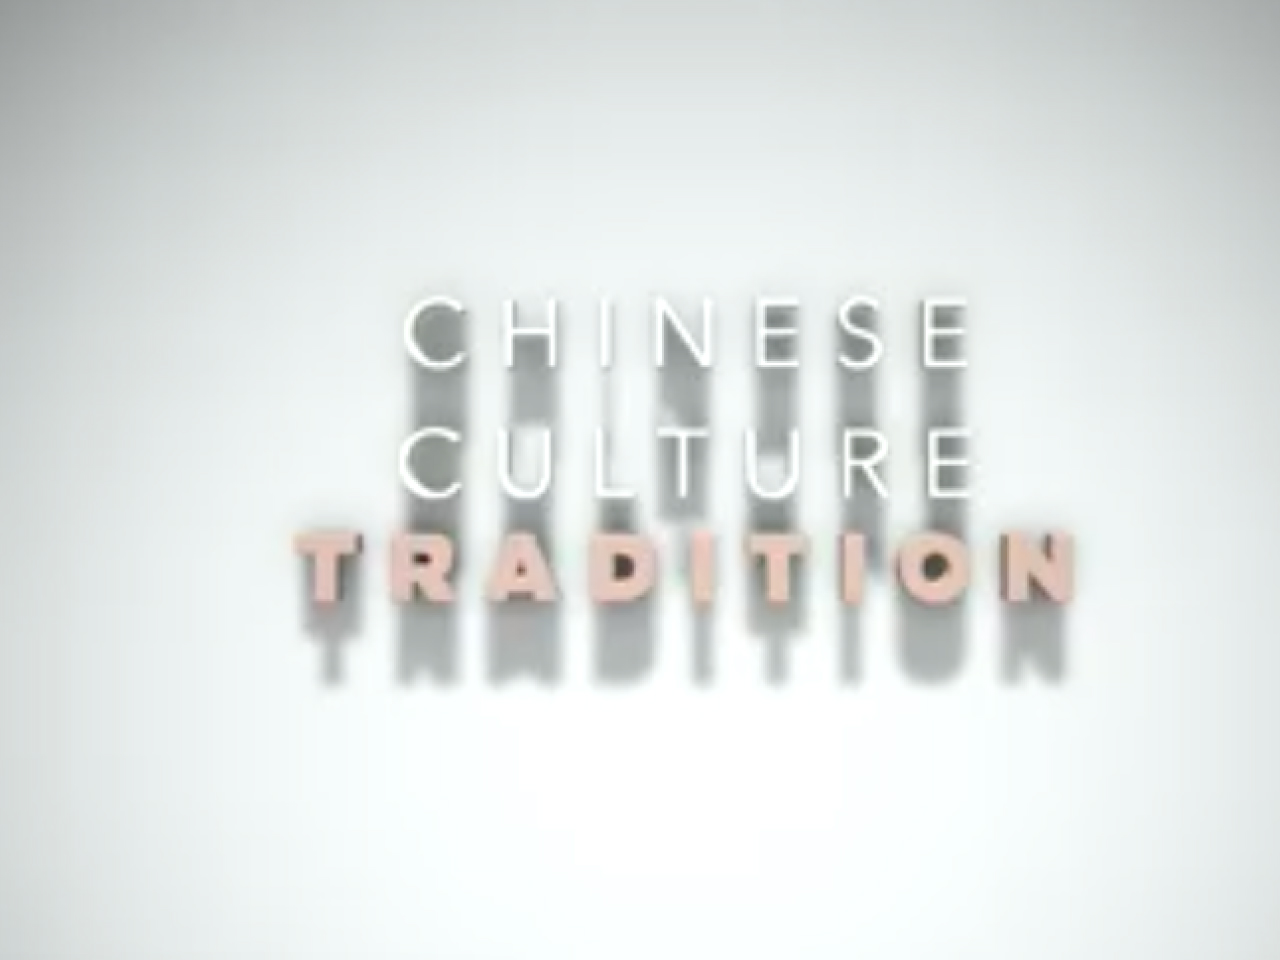 link to Chinese Culture: Interaction